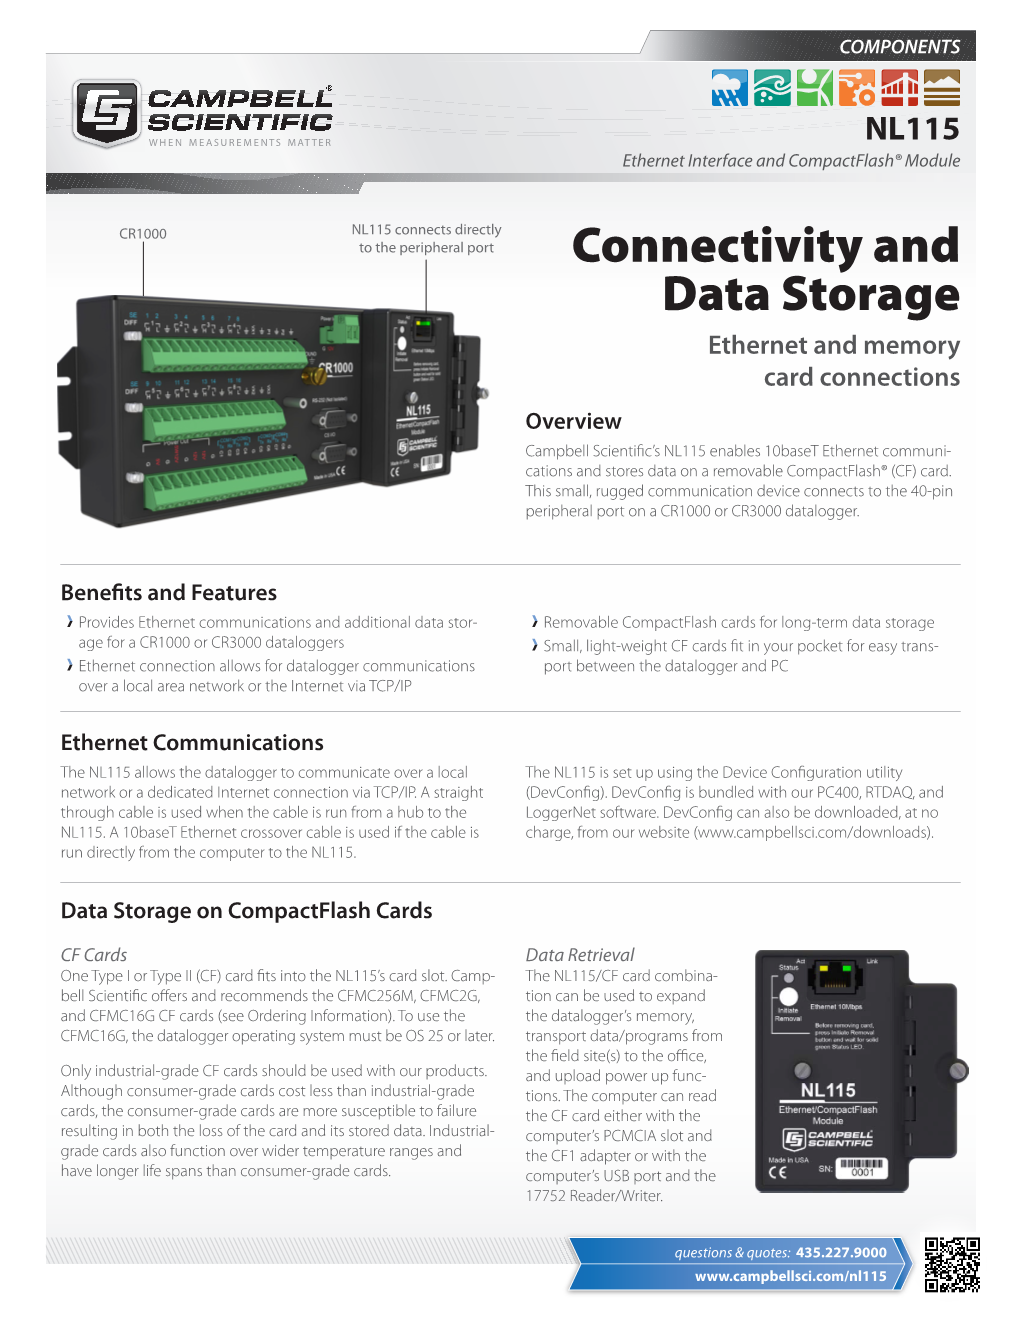 Connectivity and Data Storage